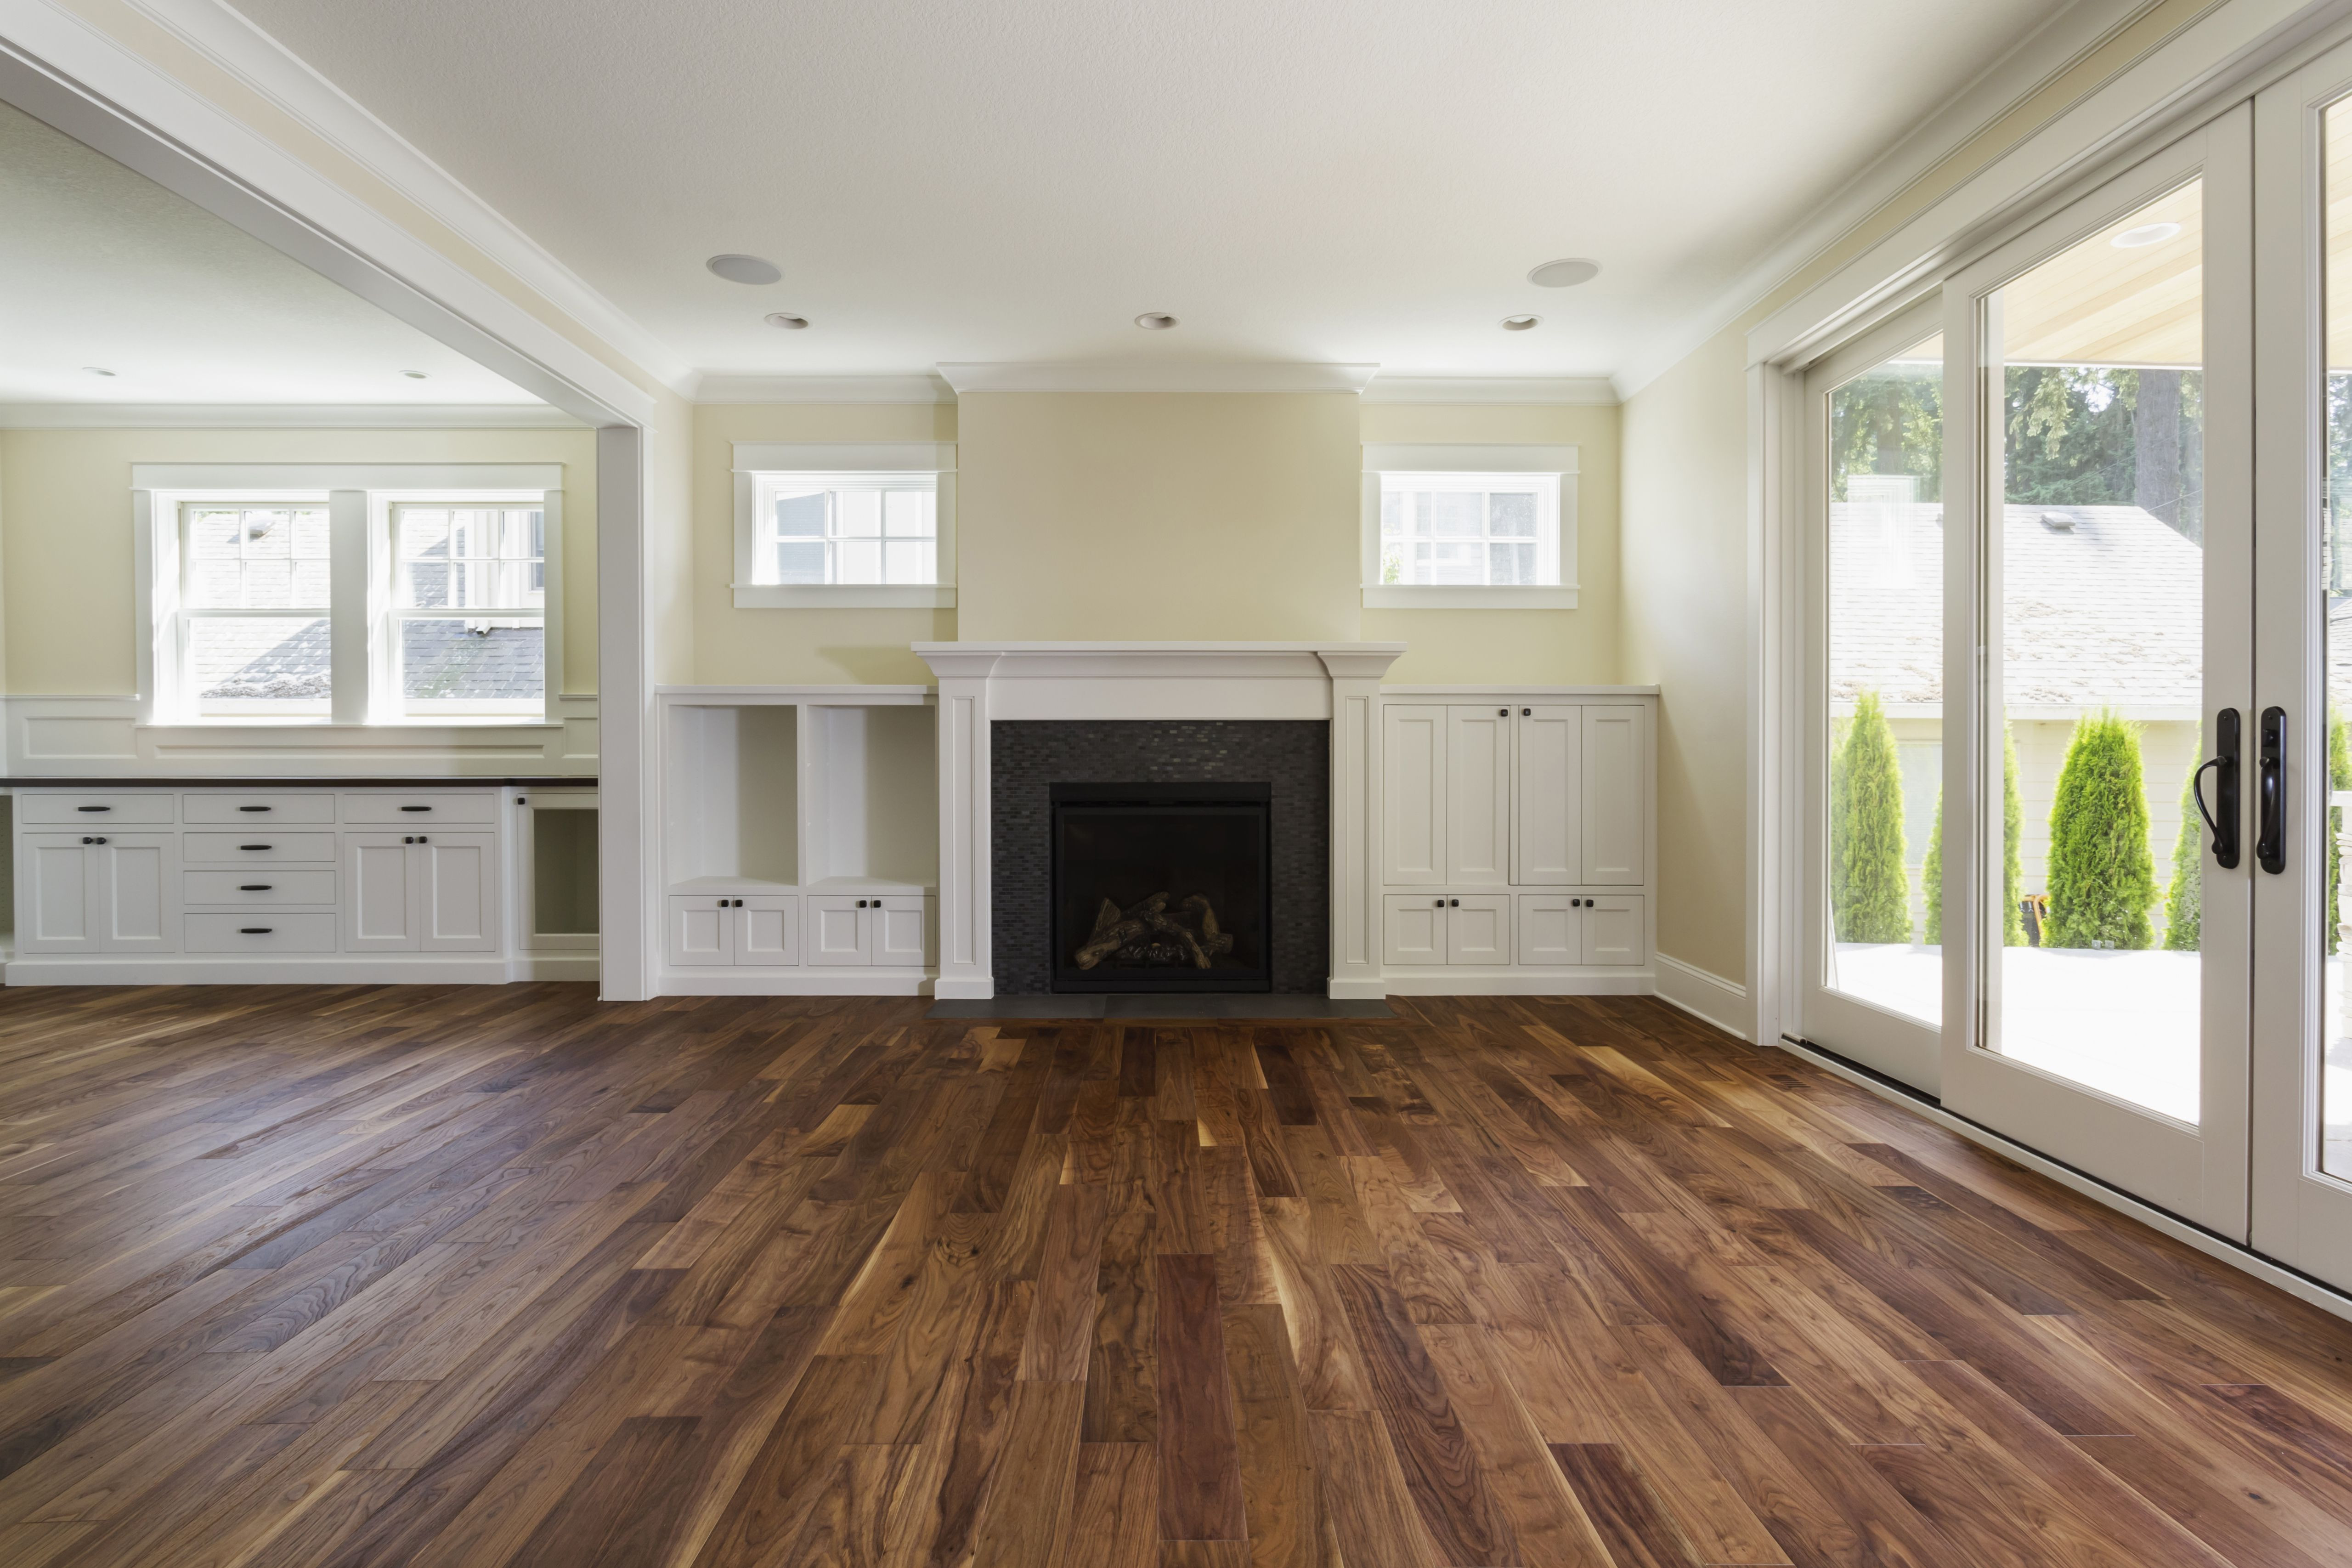 11 Popular Cost Of Bamboo Flooring Vs Hardwood 2024 free download cost of bamboo flooring vs hardwood of the pros and cons of prefinished hardwood flooring within fireplace and built in shelves in living room 482143011 57bef8e33df78cc16e035397